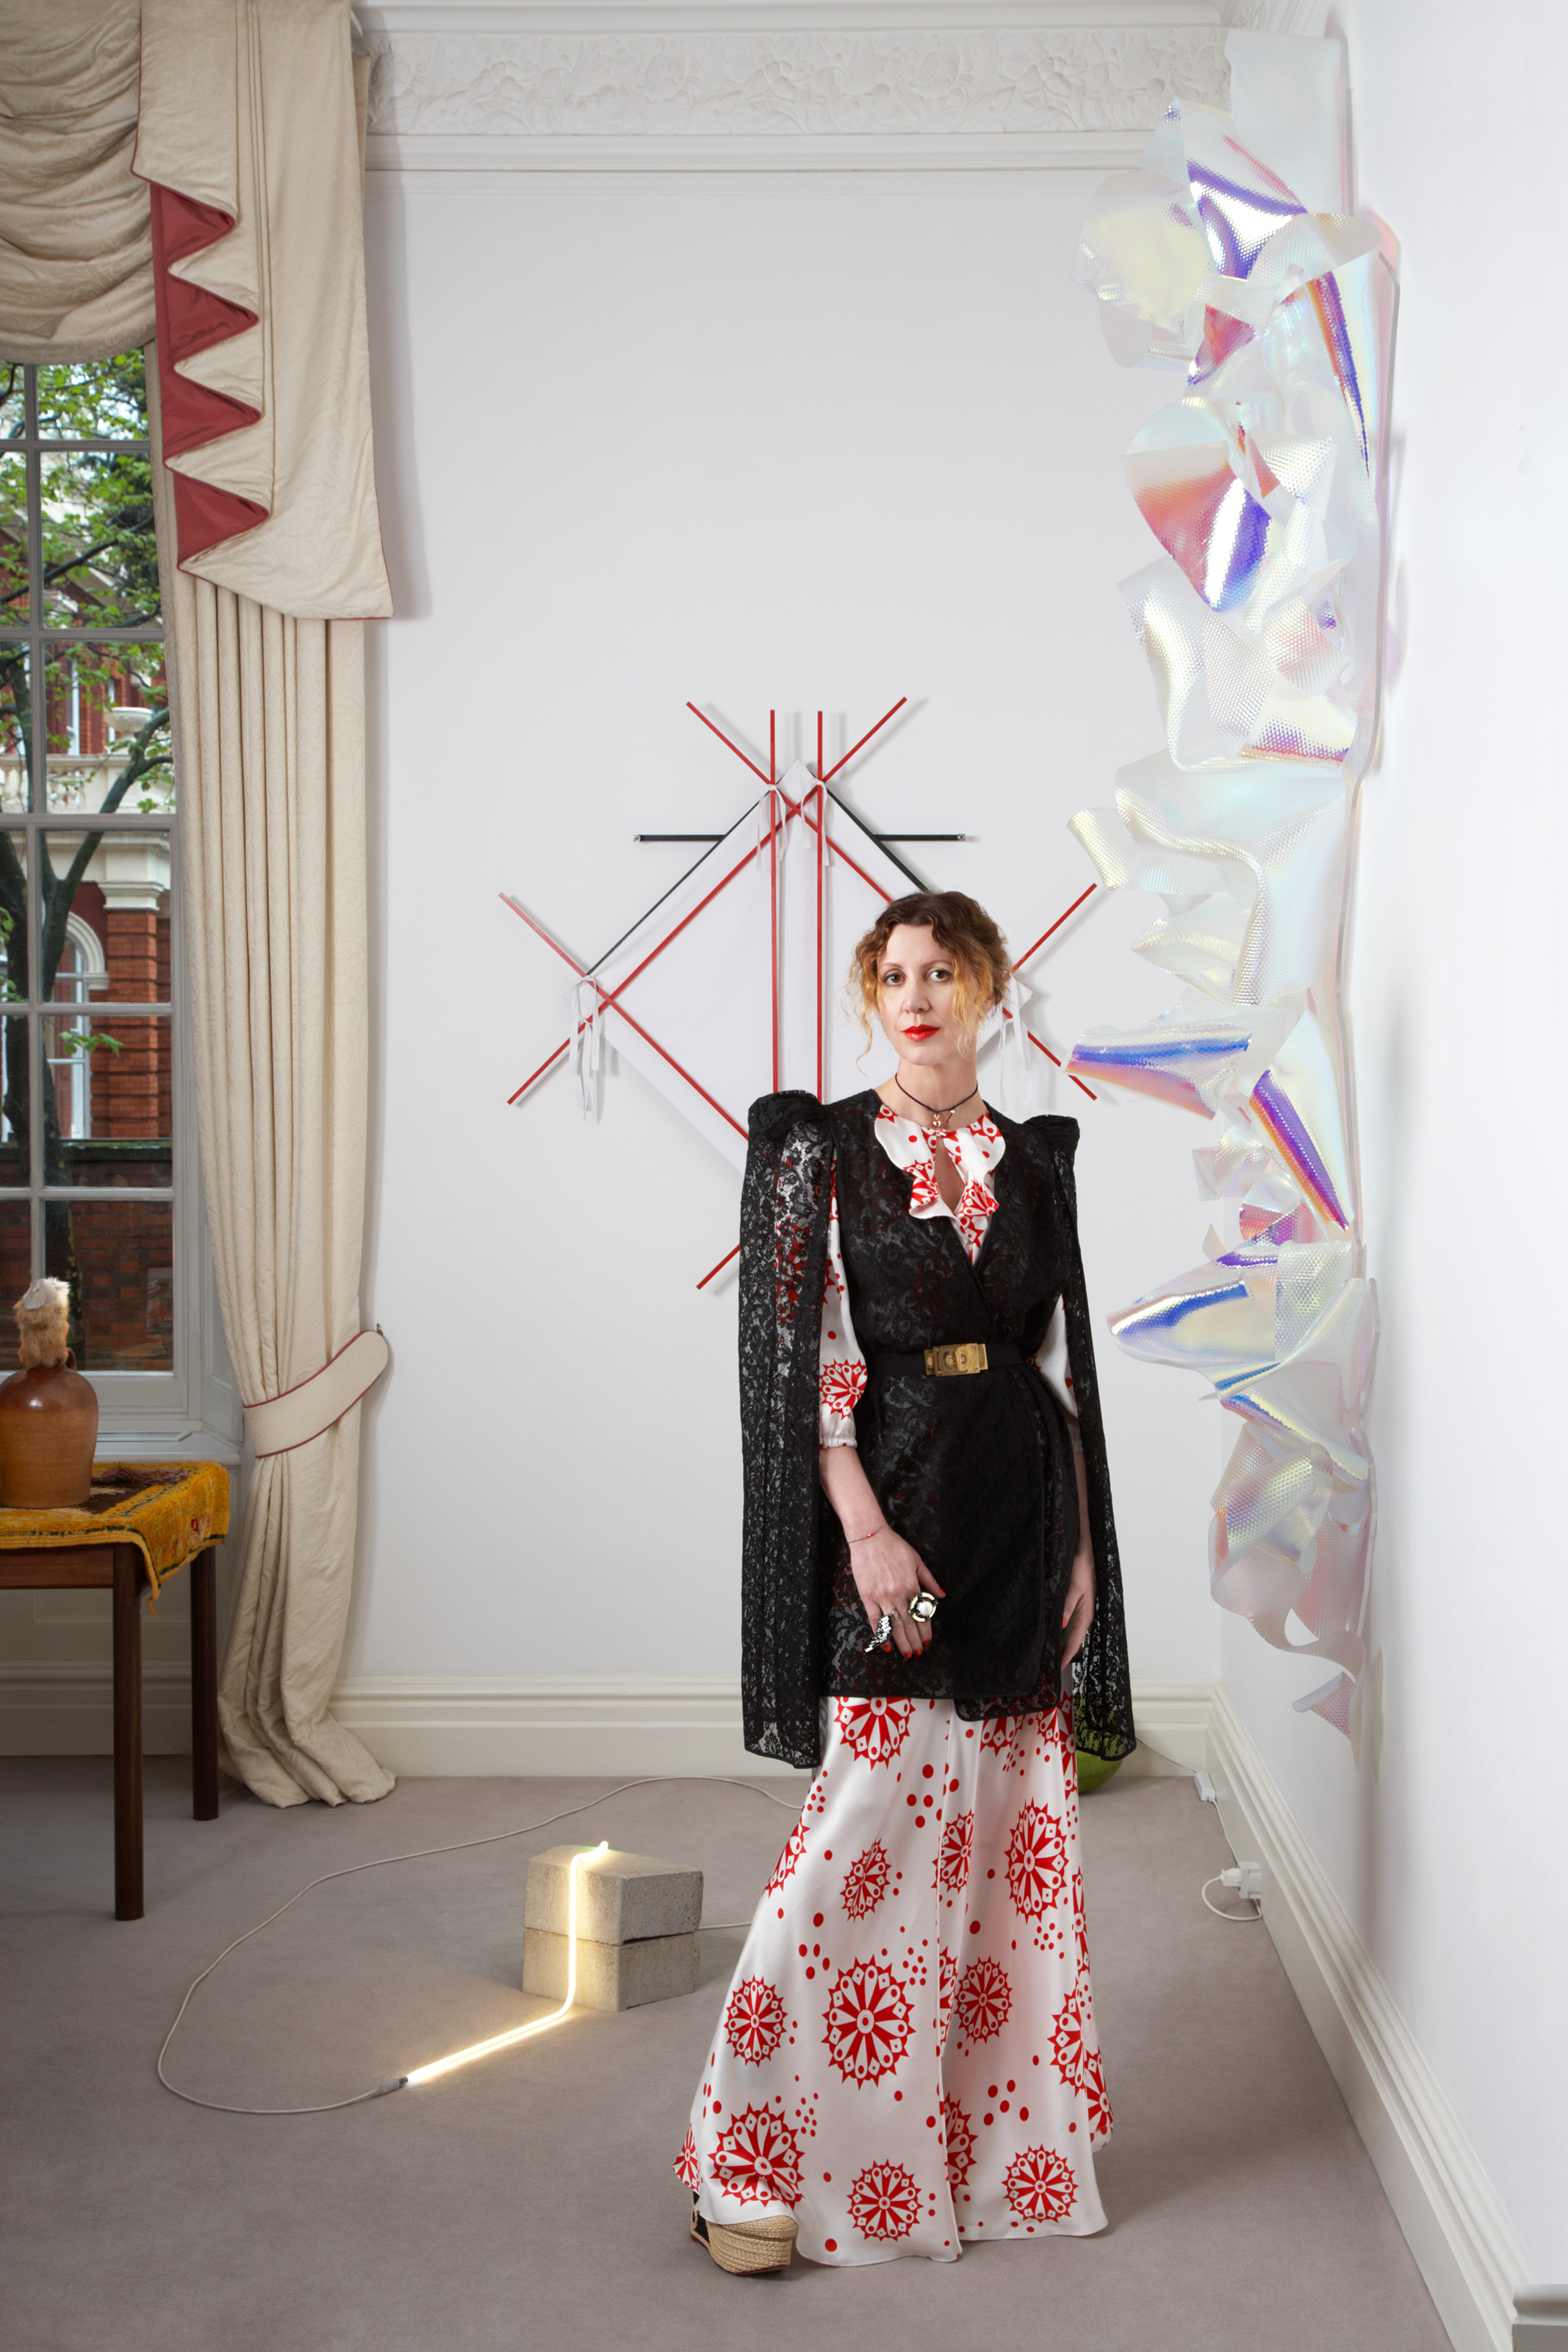 Valeria Napoleone with works from her collection